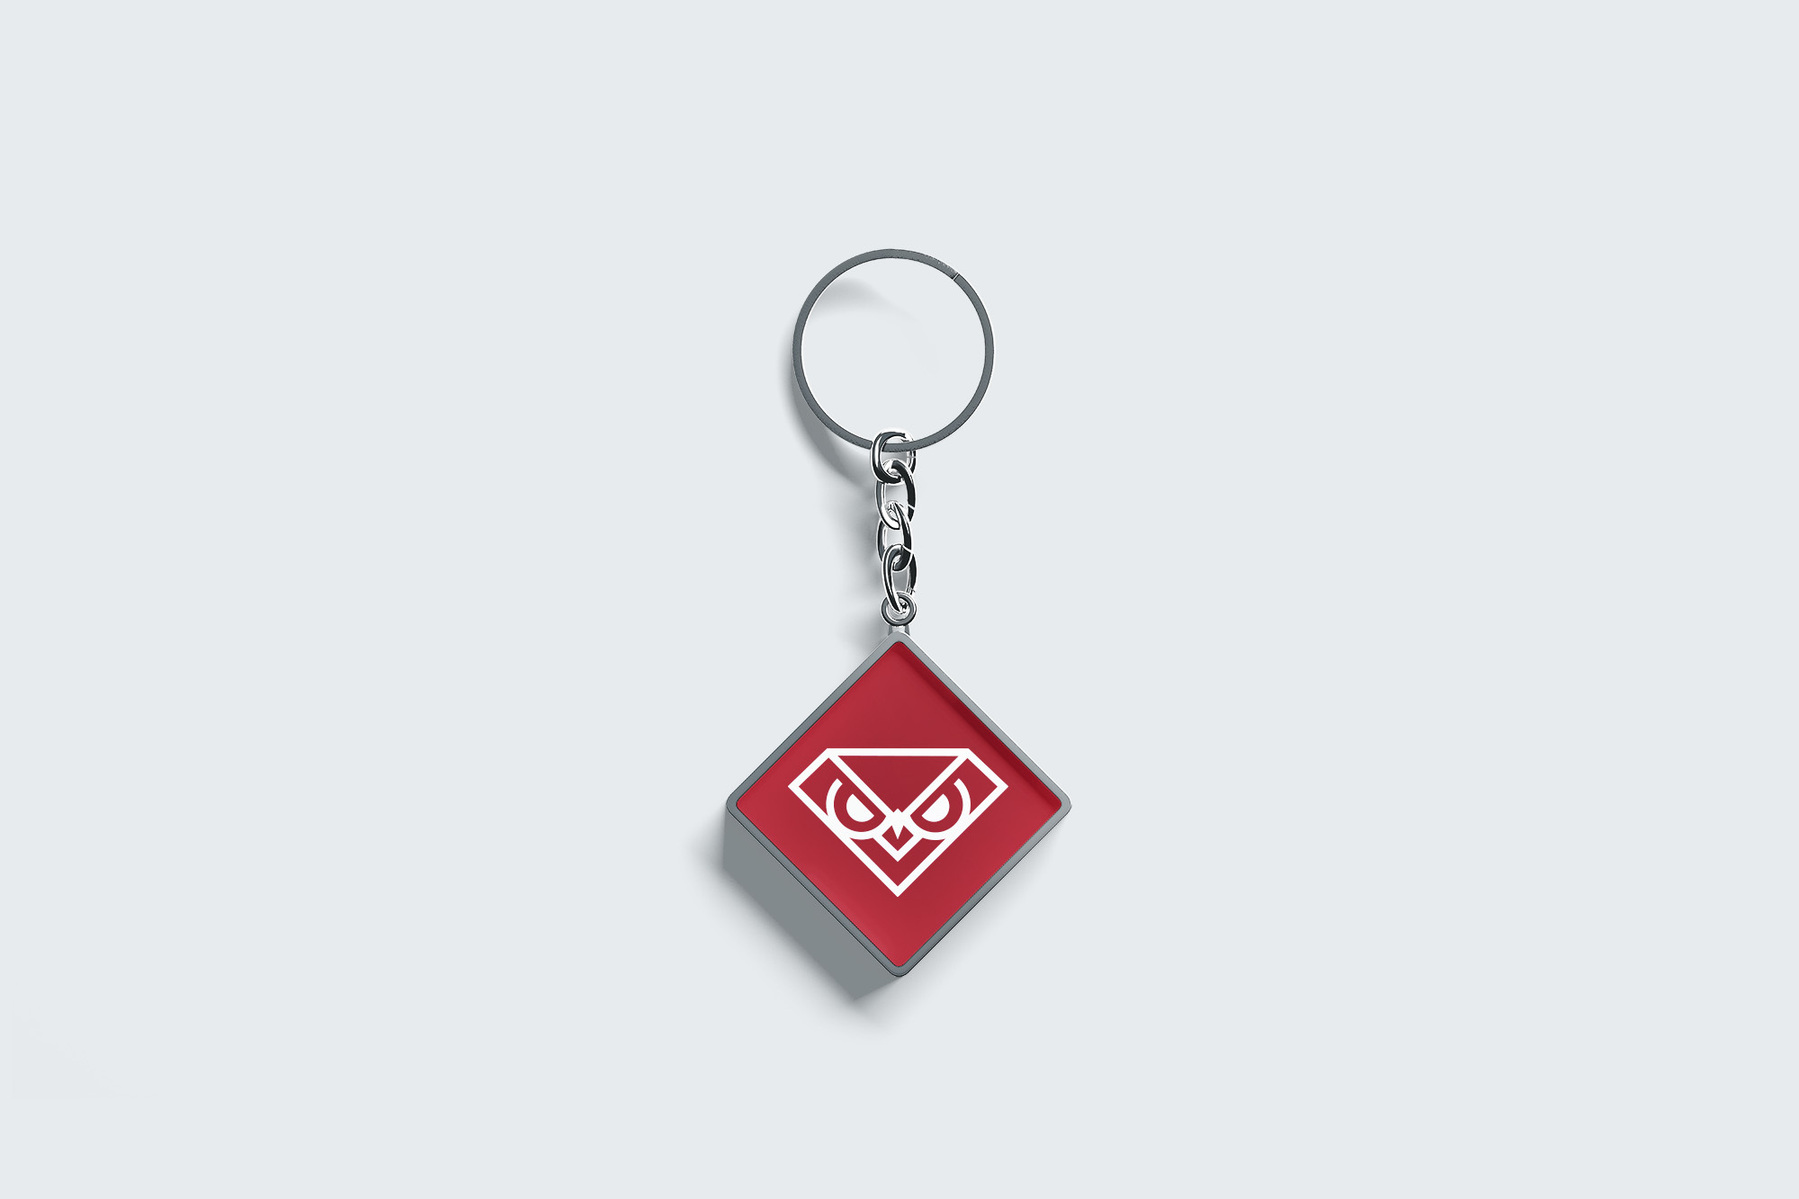 Proposed Temple Owl logo on key chain